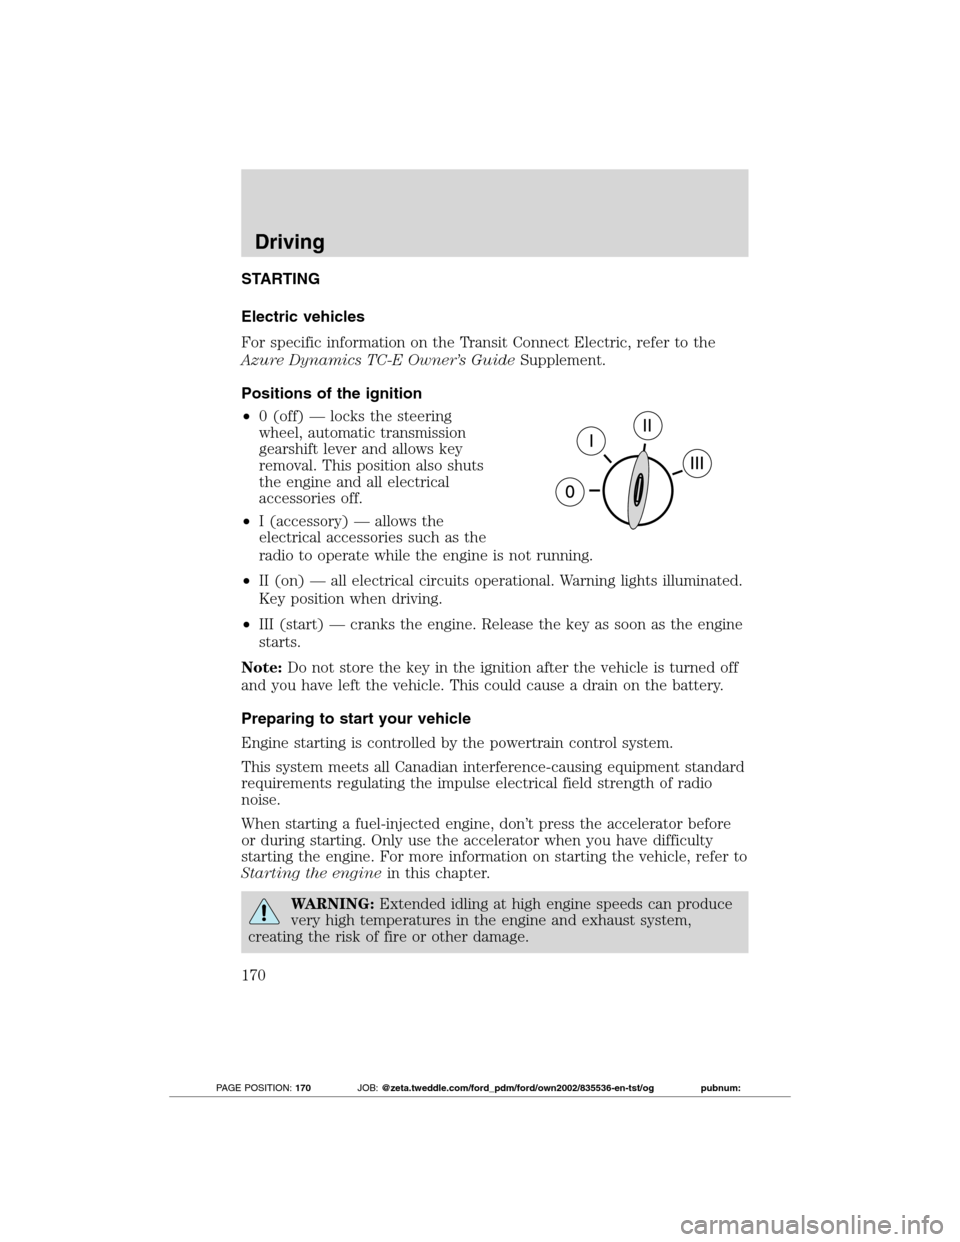 FORD TRANSIT CONNECT 2012 1.G Owners Manual STARTING
Electric vehicles
For specific information on the Transit Connect Electric, refer to the
Azure Dynamics TC-E Owner’s GuideSupplement.
Positions of the ignition
•0 (off) — locks the stee